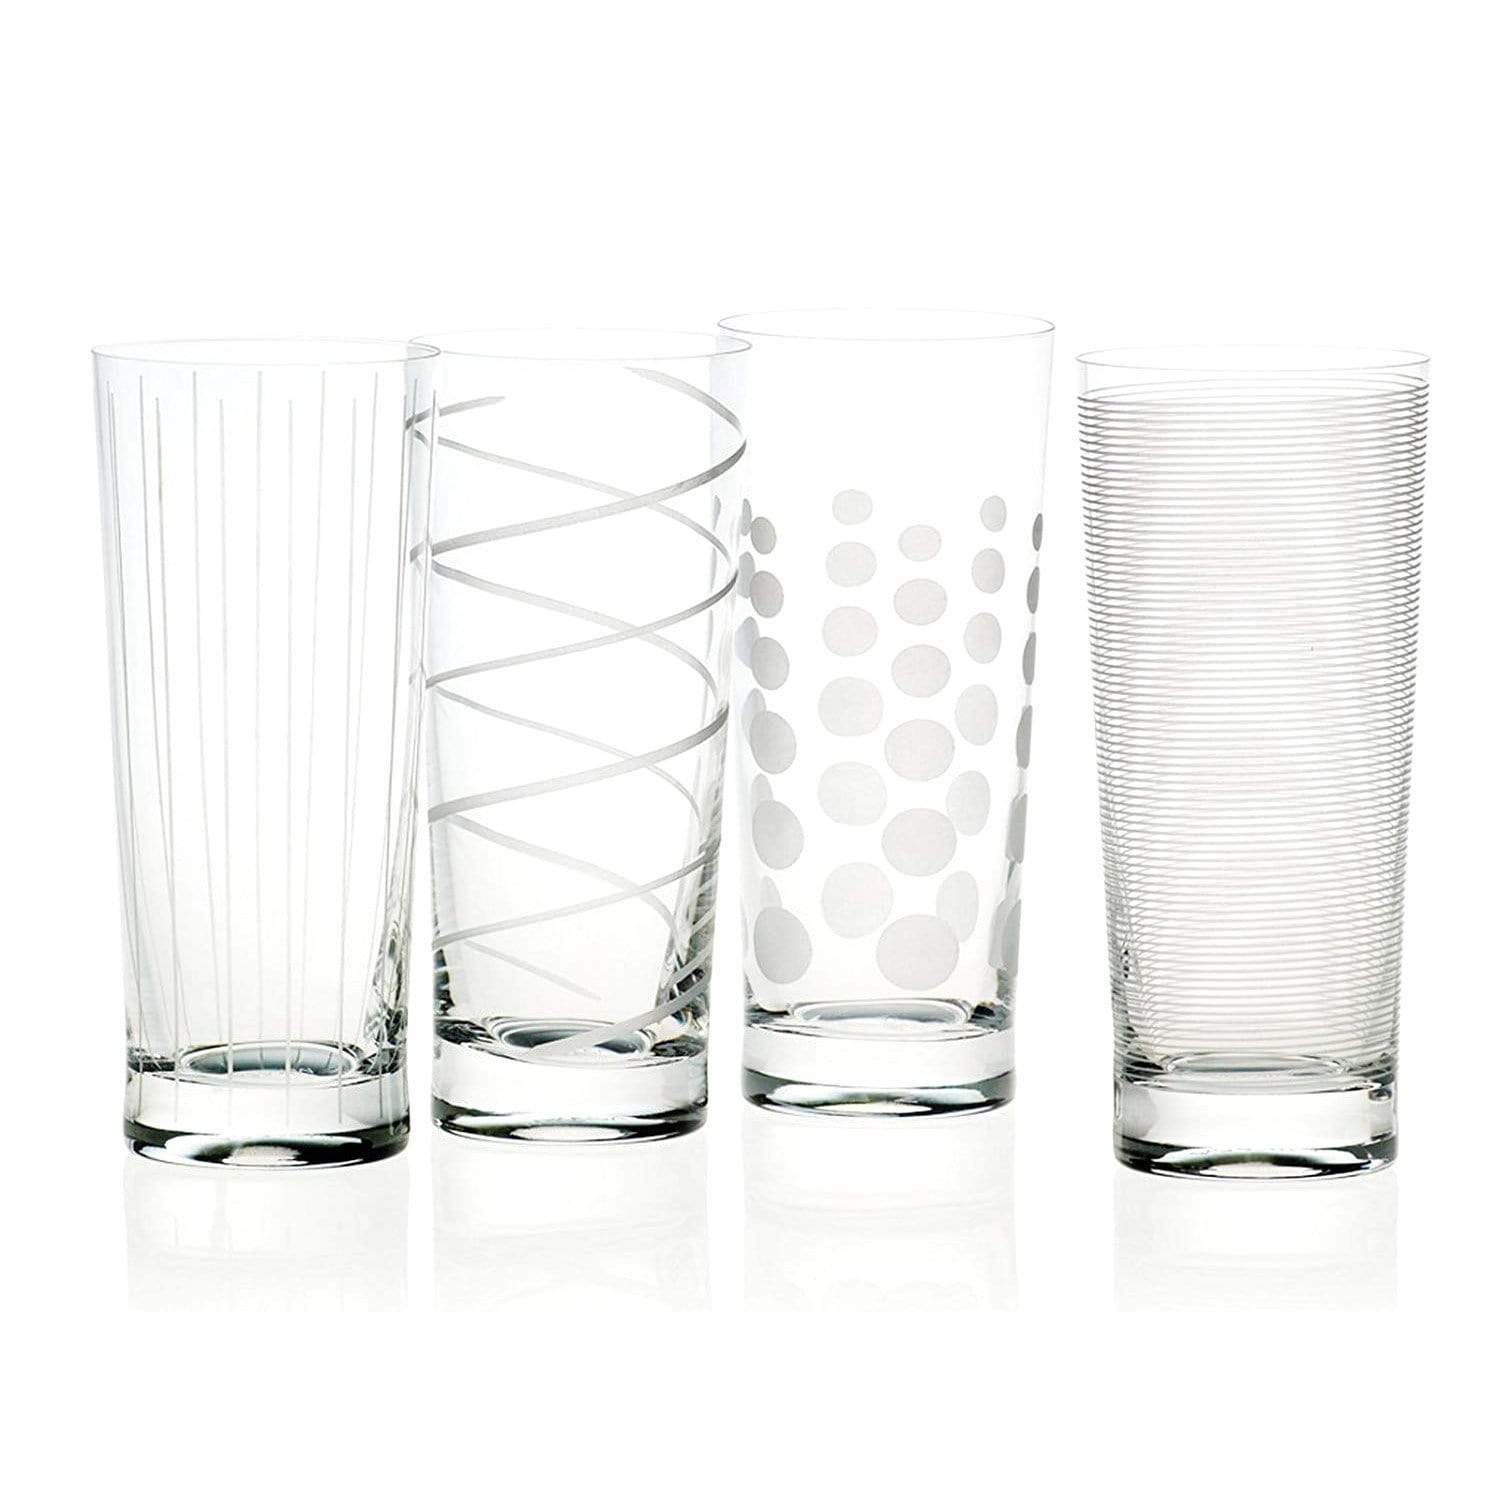 Creative Tops Mikasa Cheers Highball Tops Glass Set - Clear and Silver, 550 ml, 4 Piece - 5159317 - Jashanmal Home